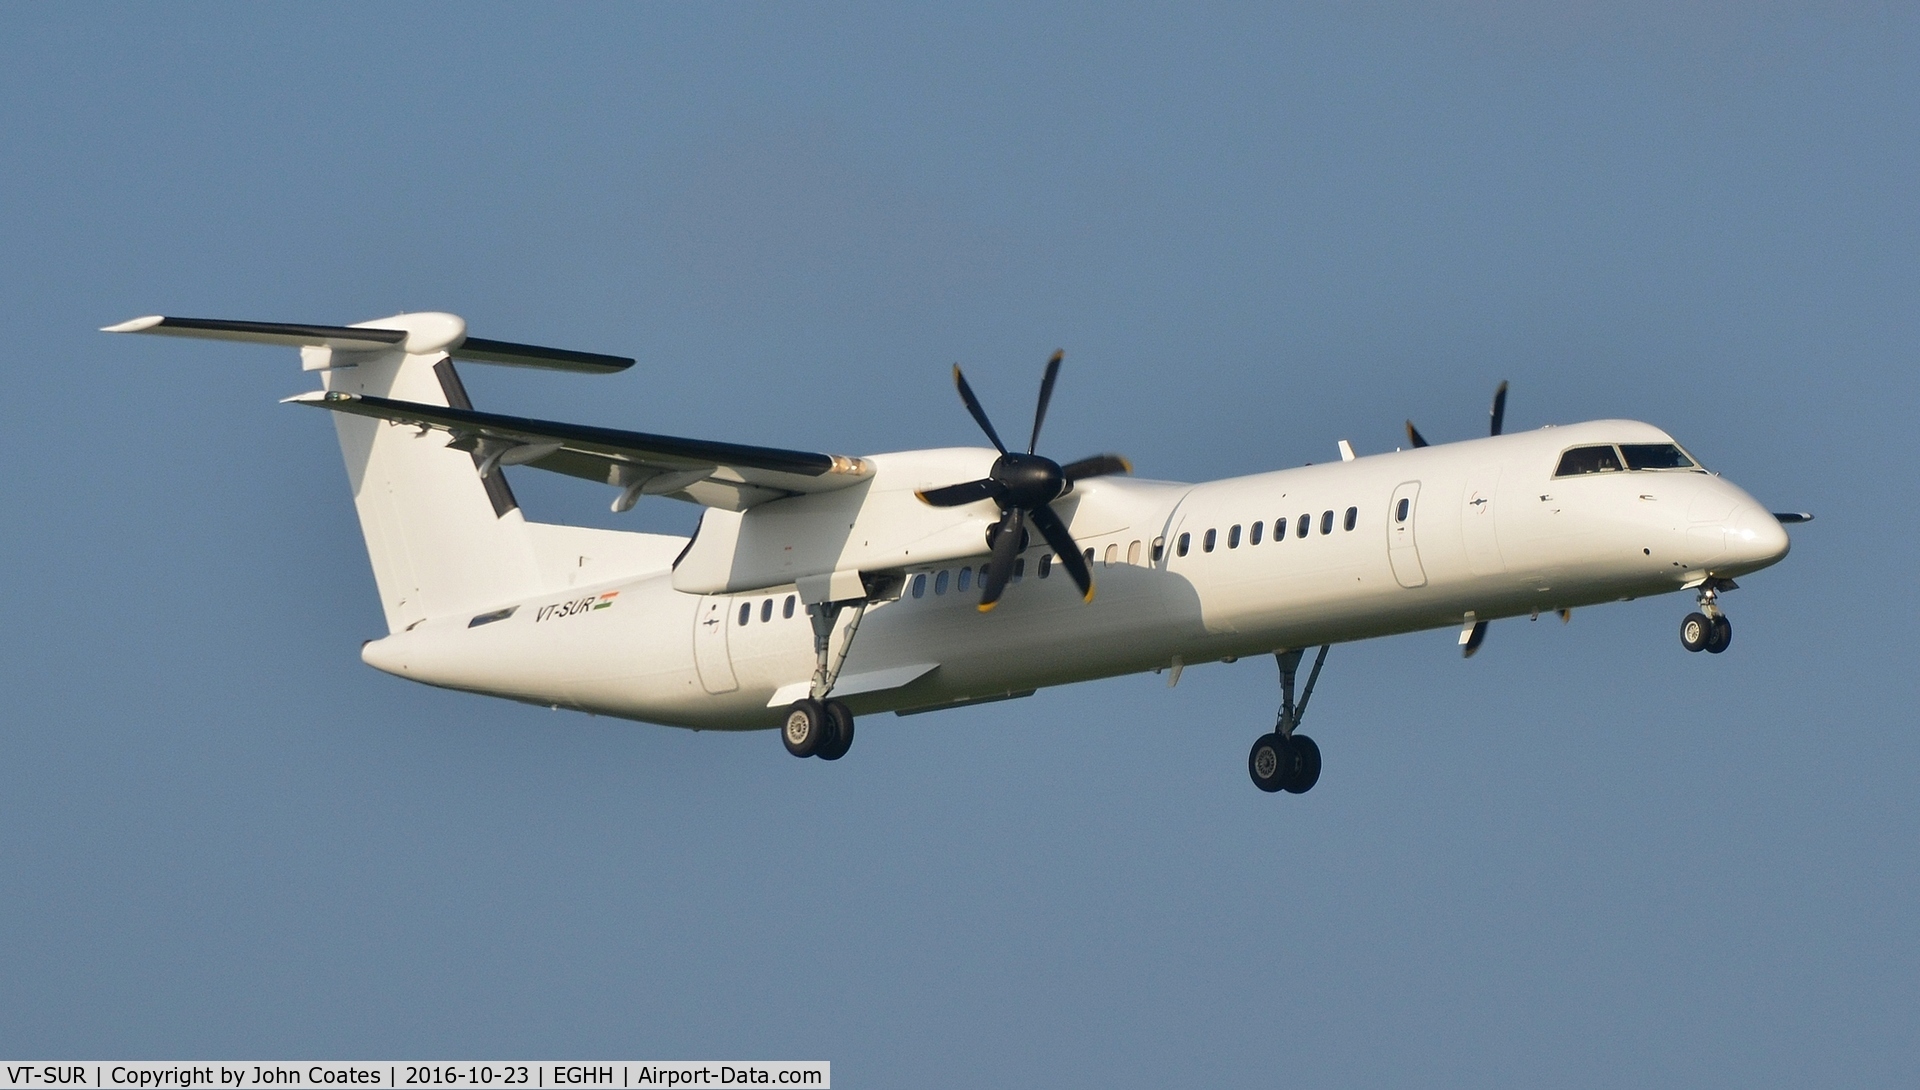 VT-SUR, 2010 Bombardier DHC-8-402 Dash 8 C/N 4342, ex N342NG arriving for fuel stop on delivery